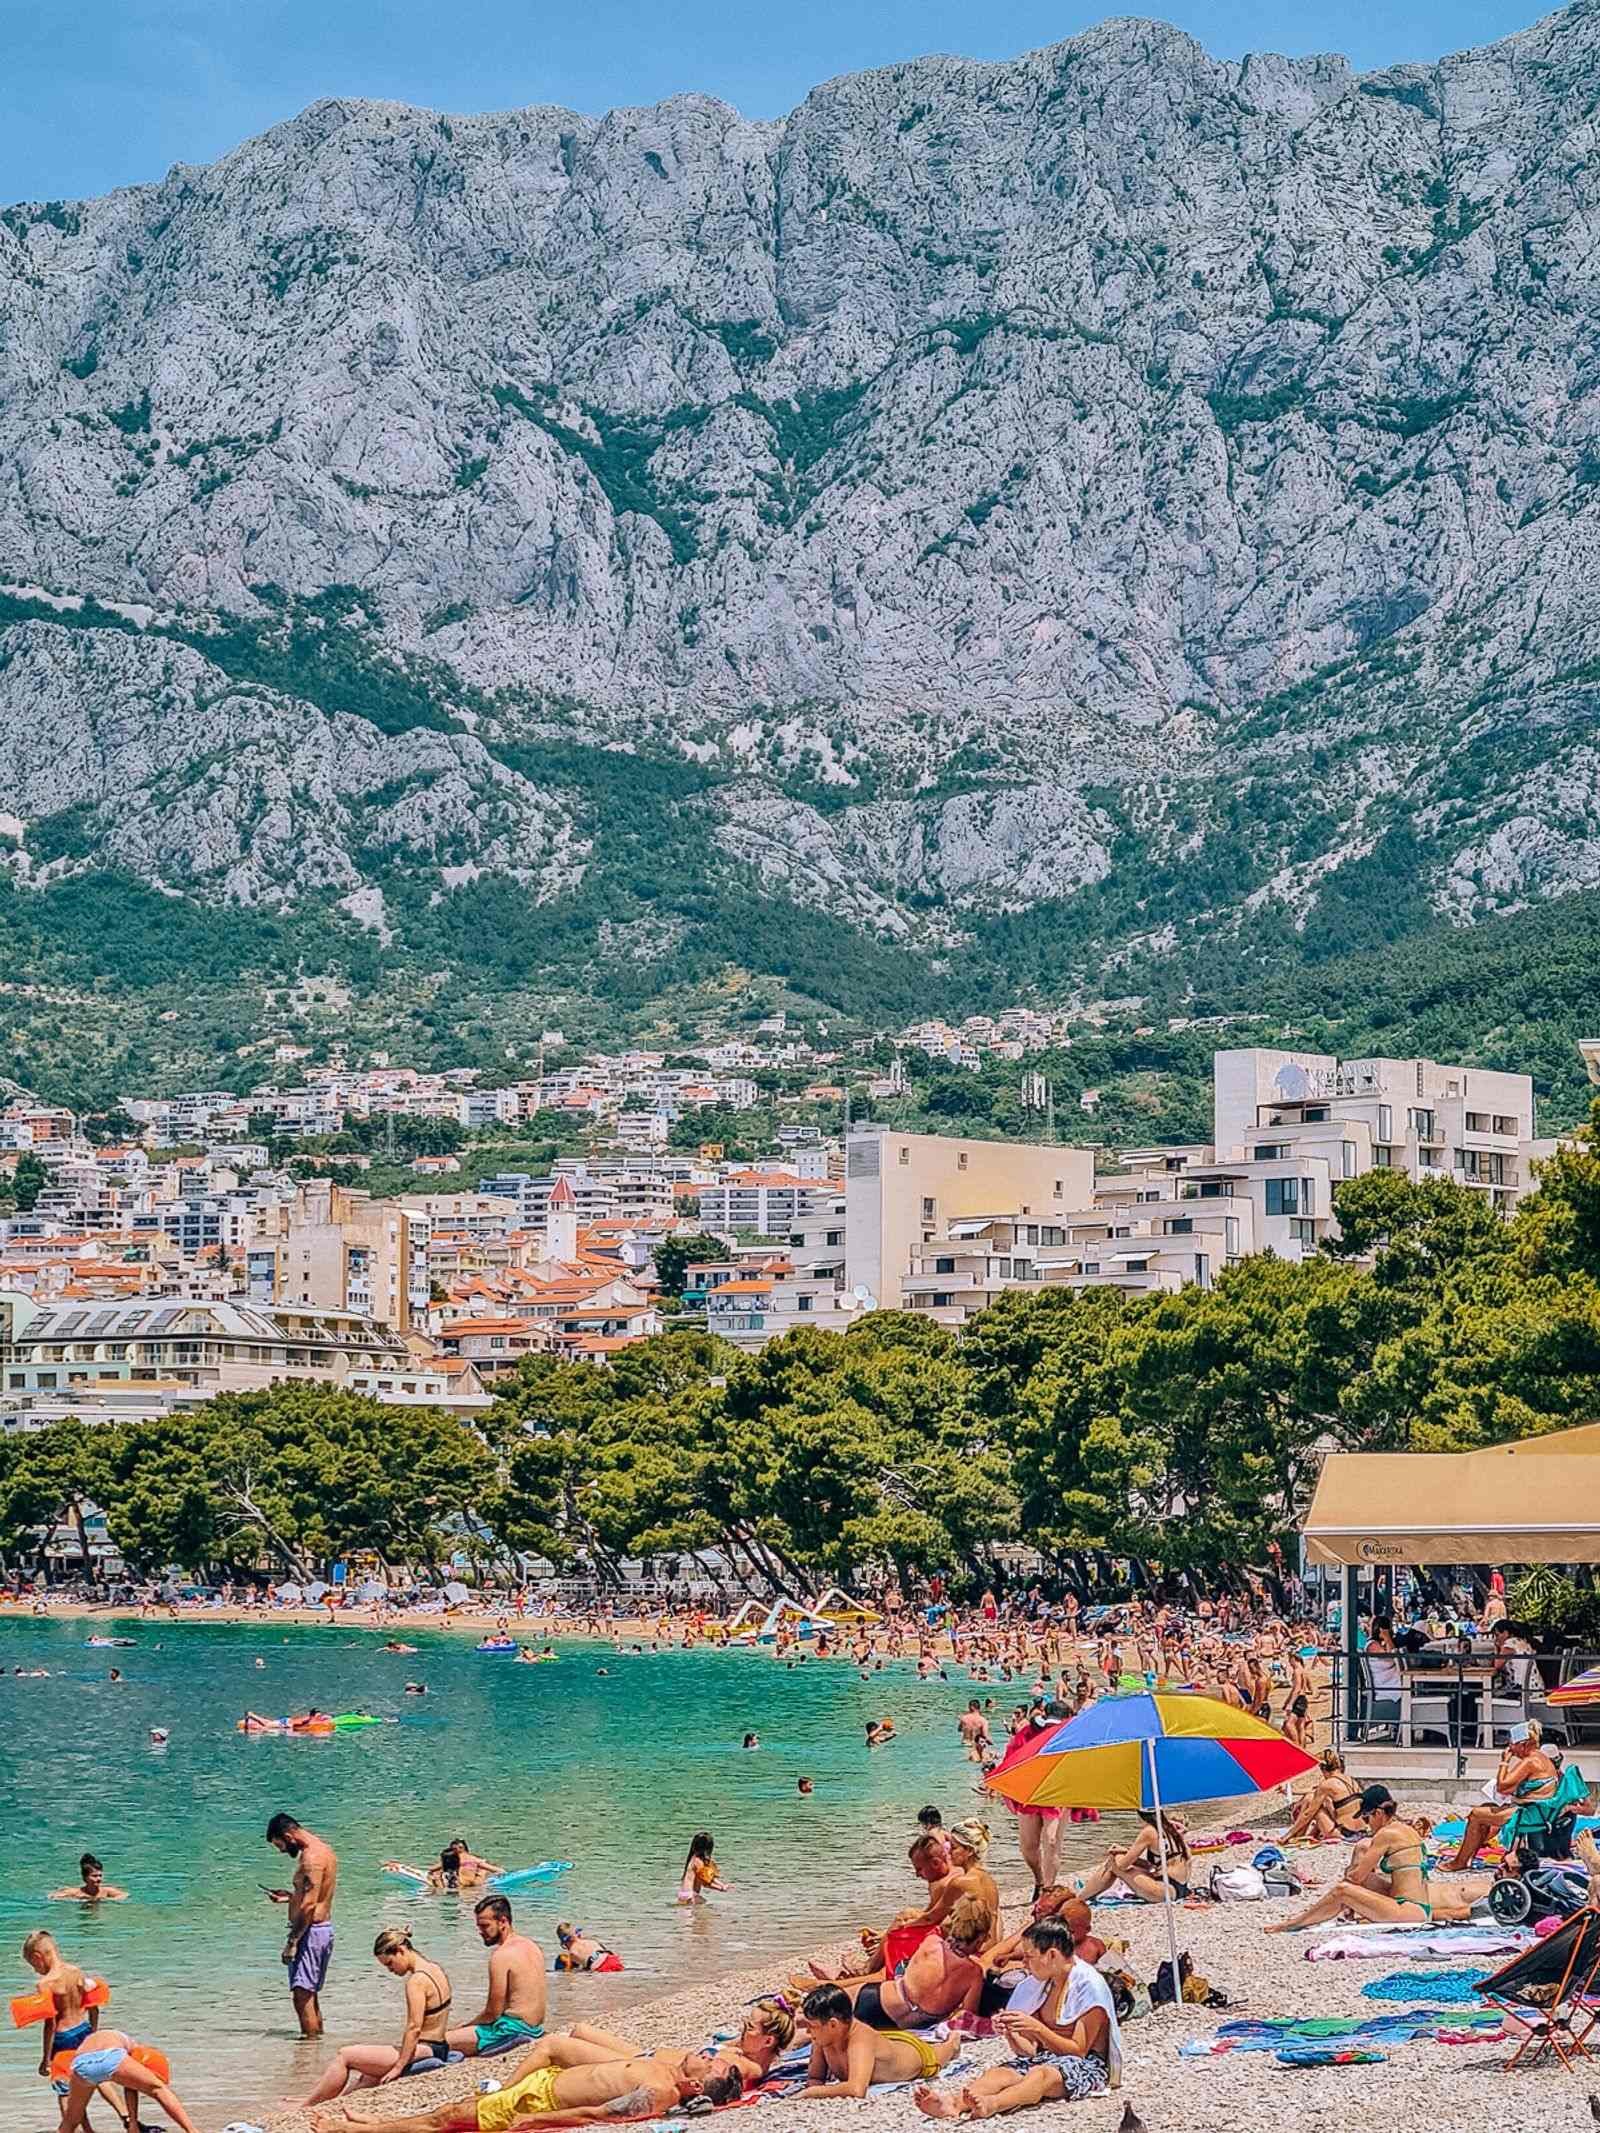 A packed beach with emerald green water, lined with trees and a town in the distance on the mountainside. A huge mountain dominates the background of the photo